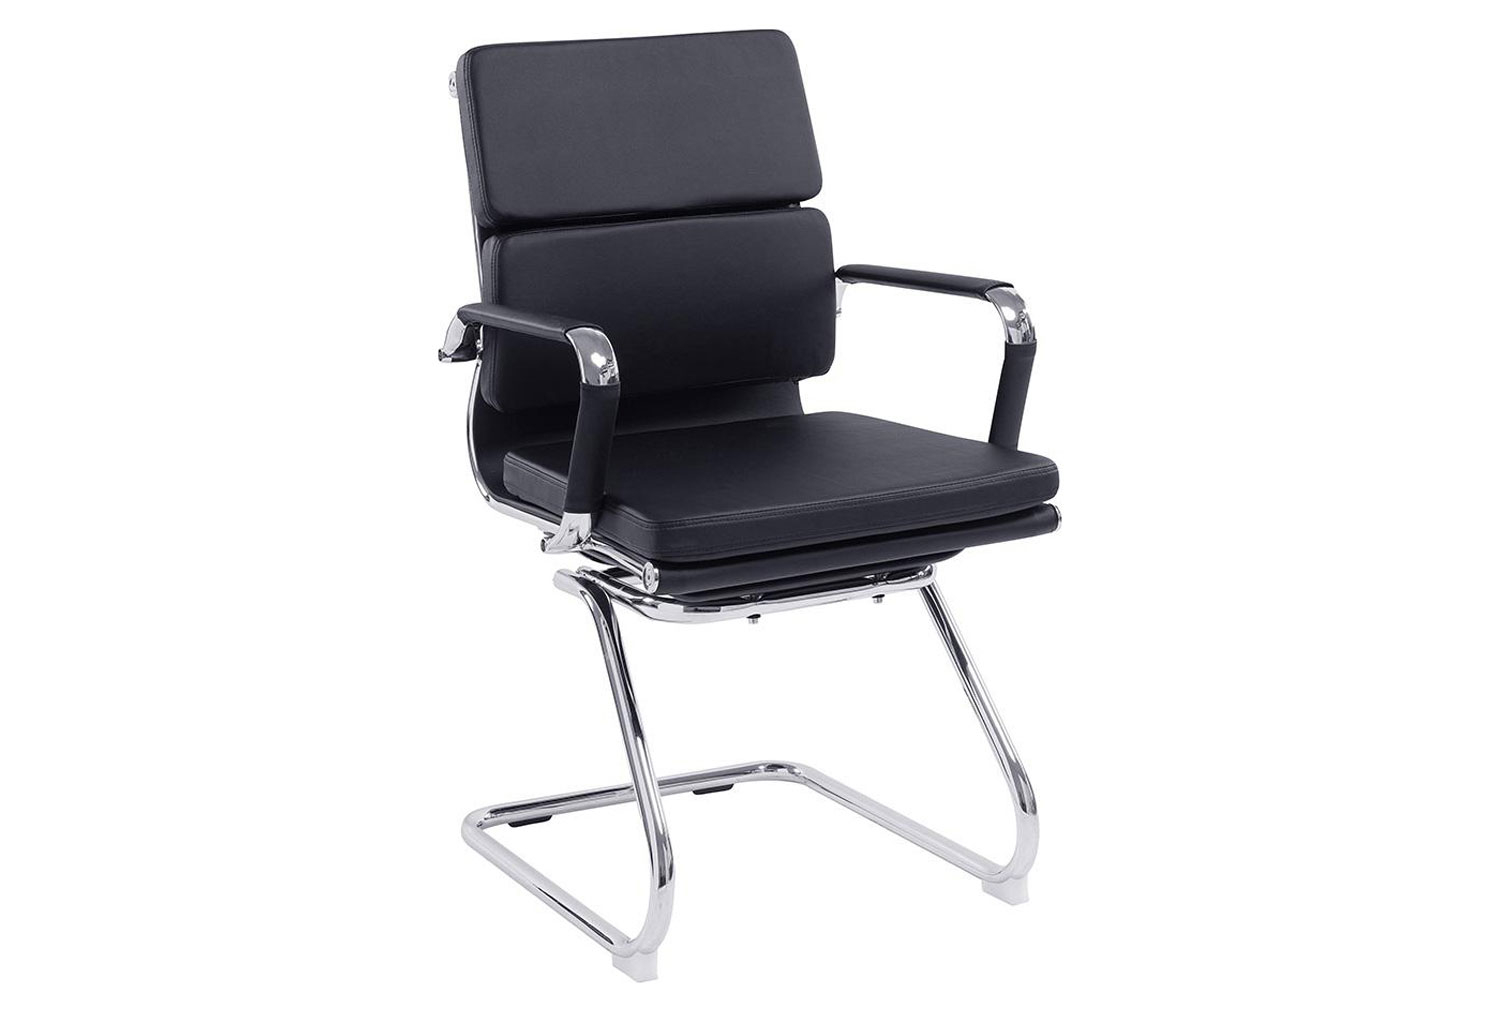 Dole Bonded Leather Visitor Office Chair, Black, Express Delivery